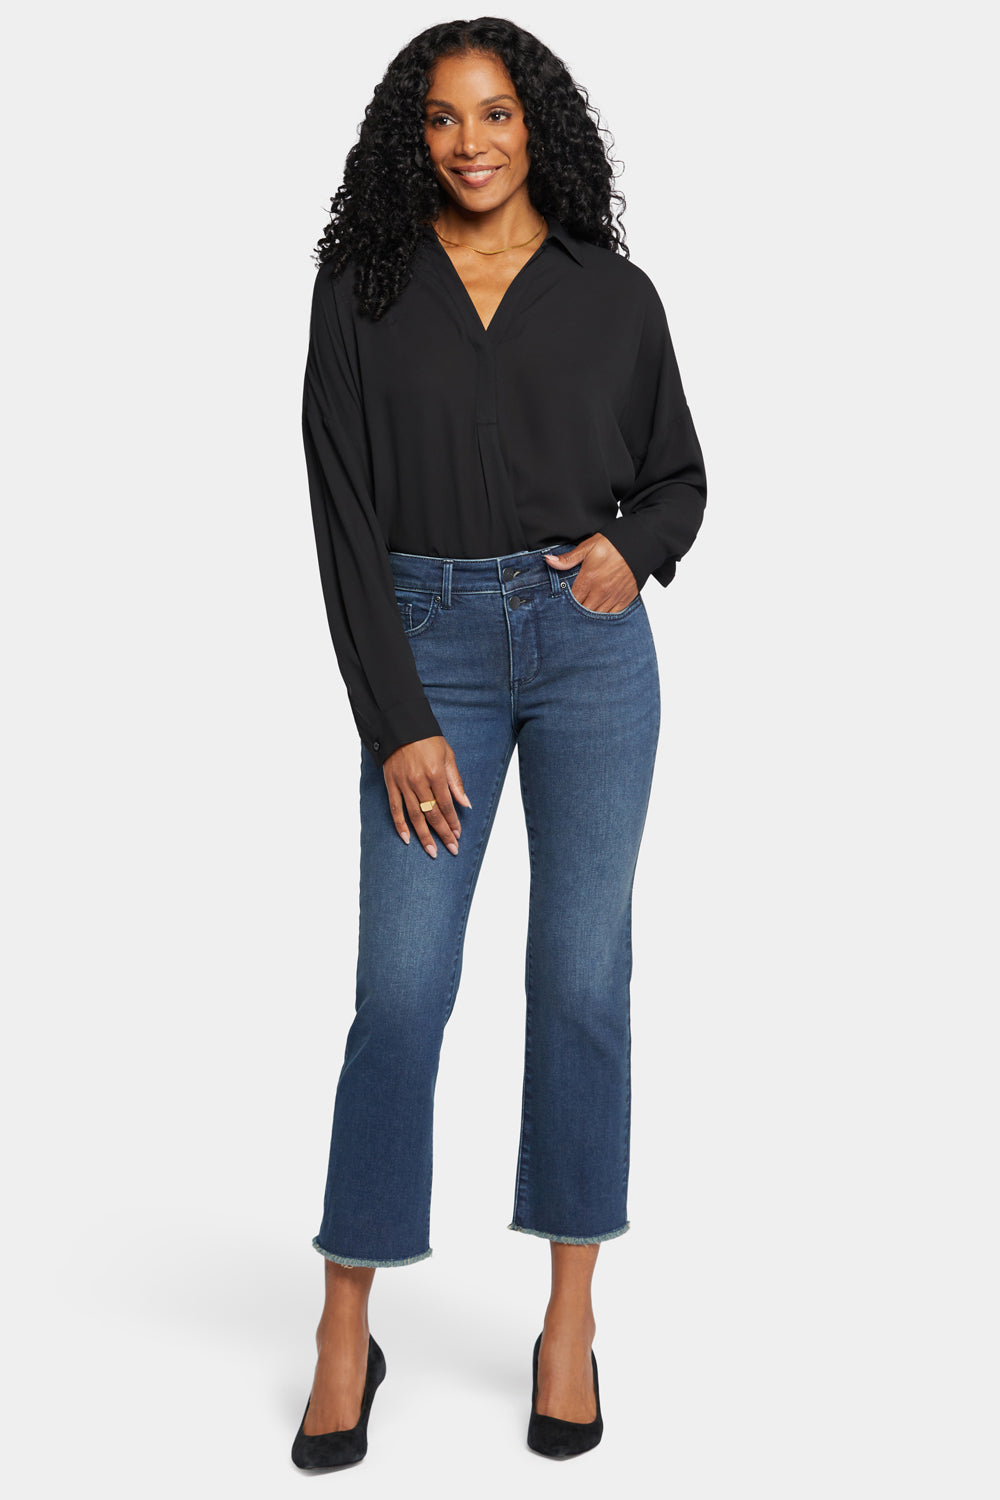 NYDJ Marilyn Straight Ankle Jeans With Double-Button Fly And Frayed Hems  - Precious